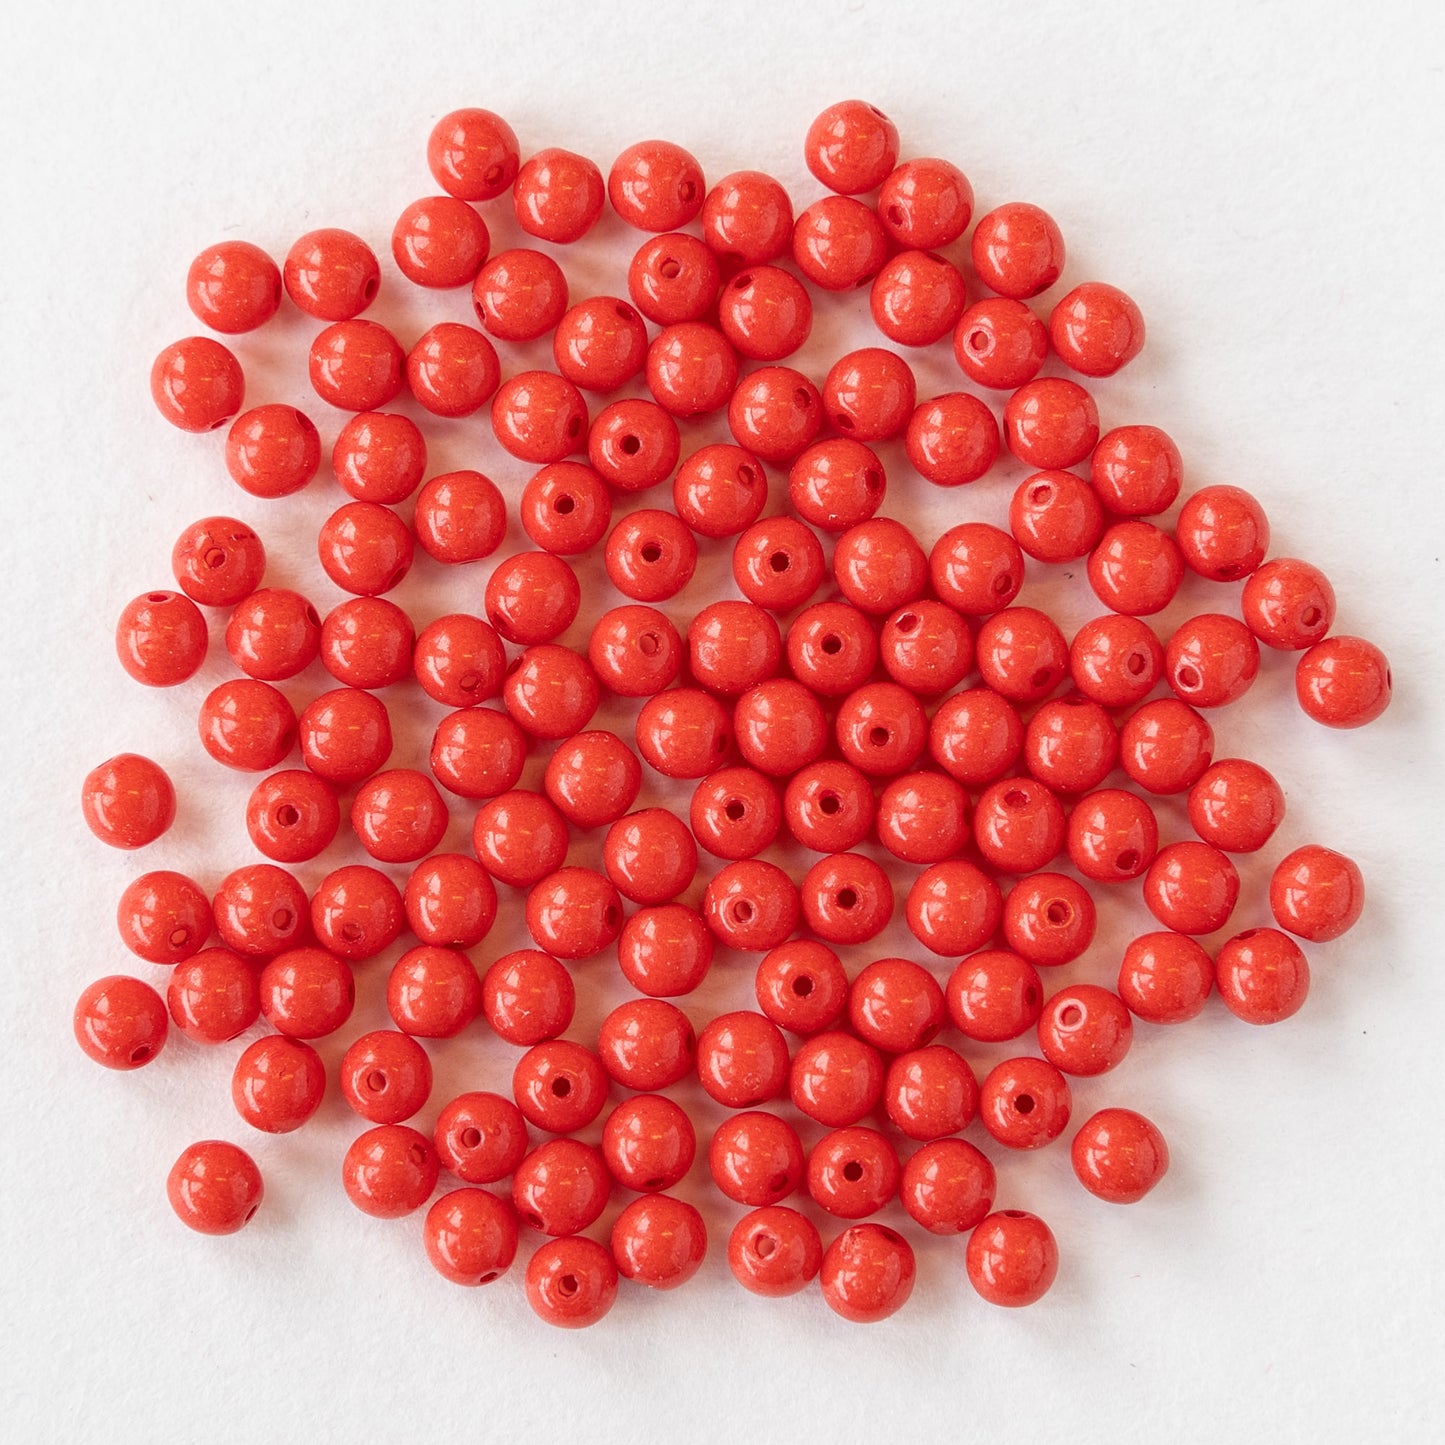 4mm Round Opaques - Red - 100 Beads